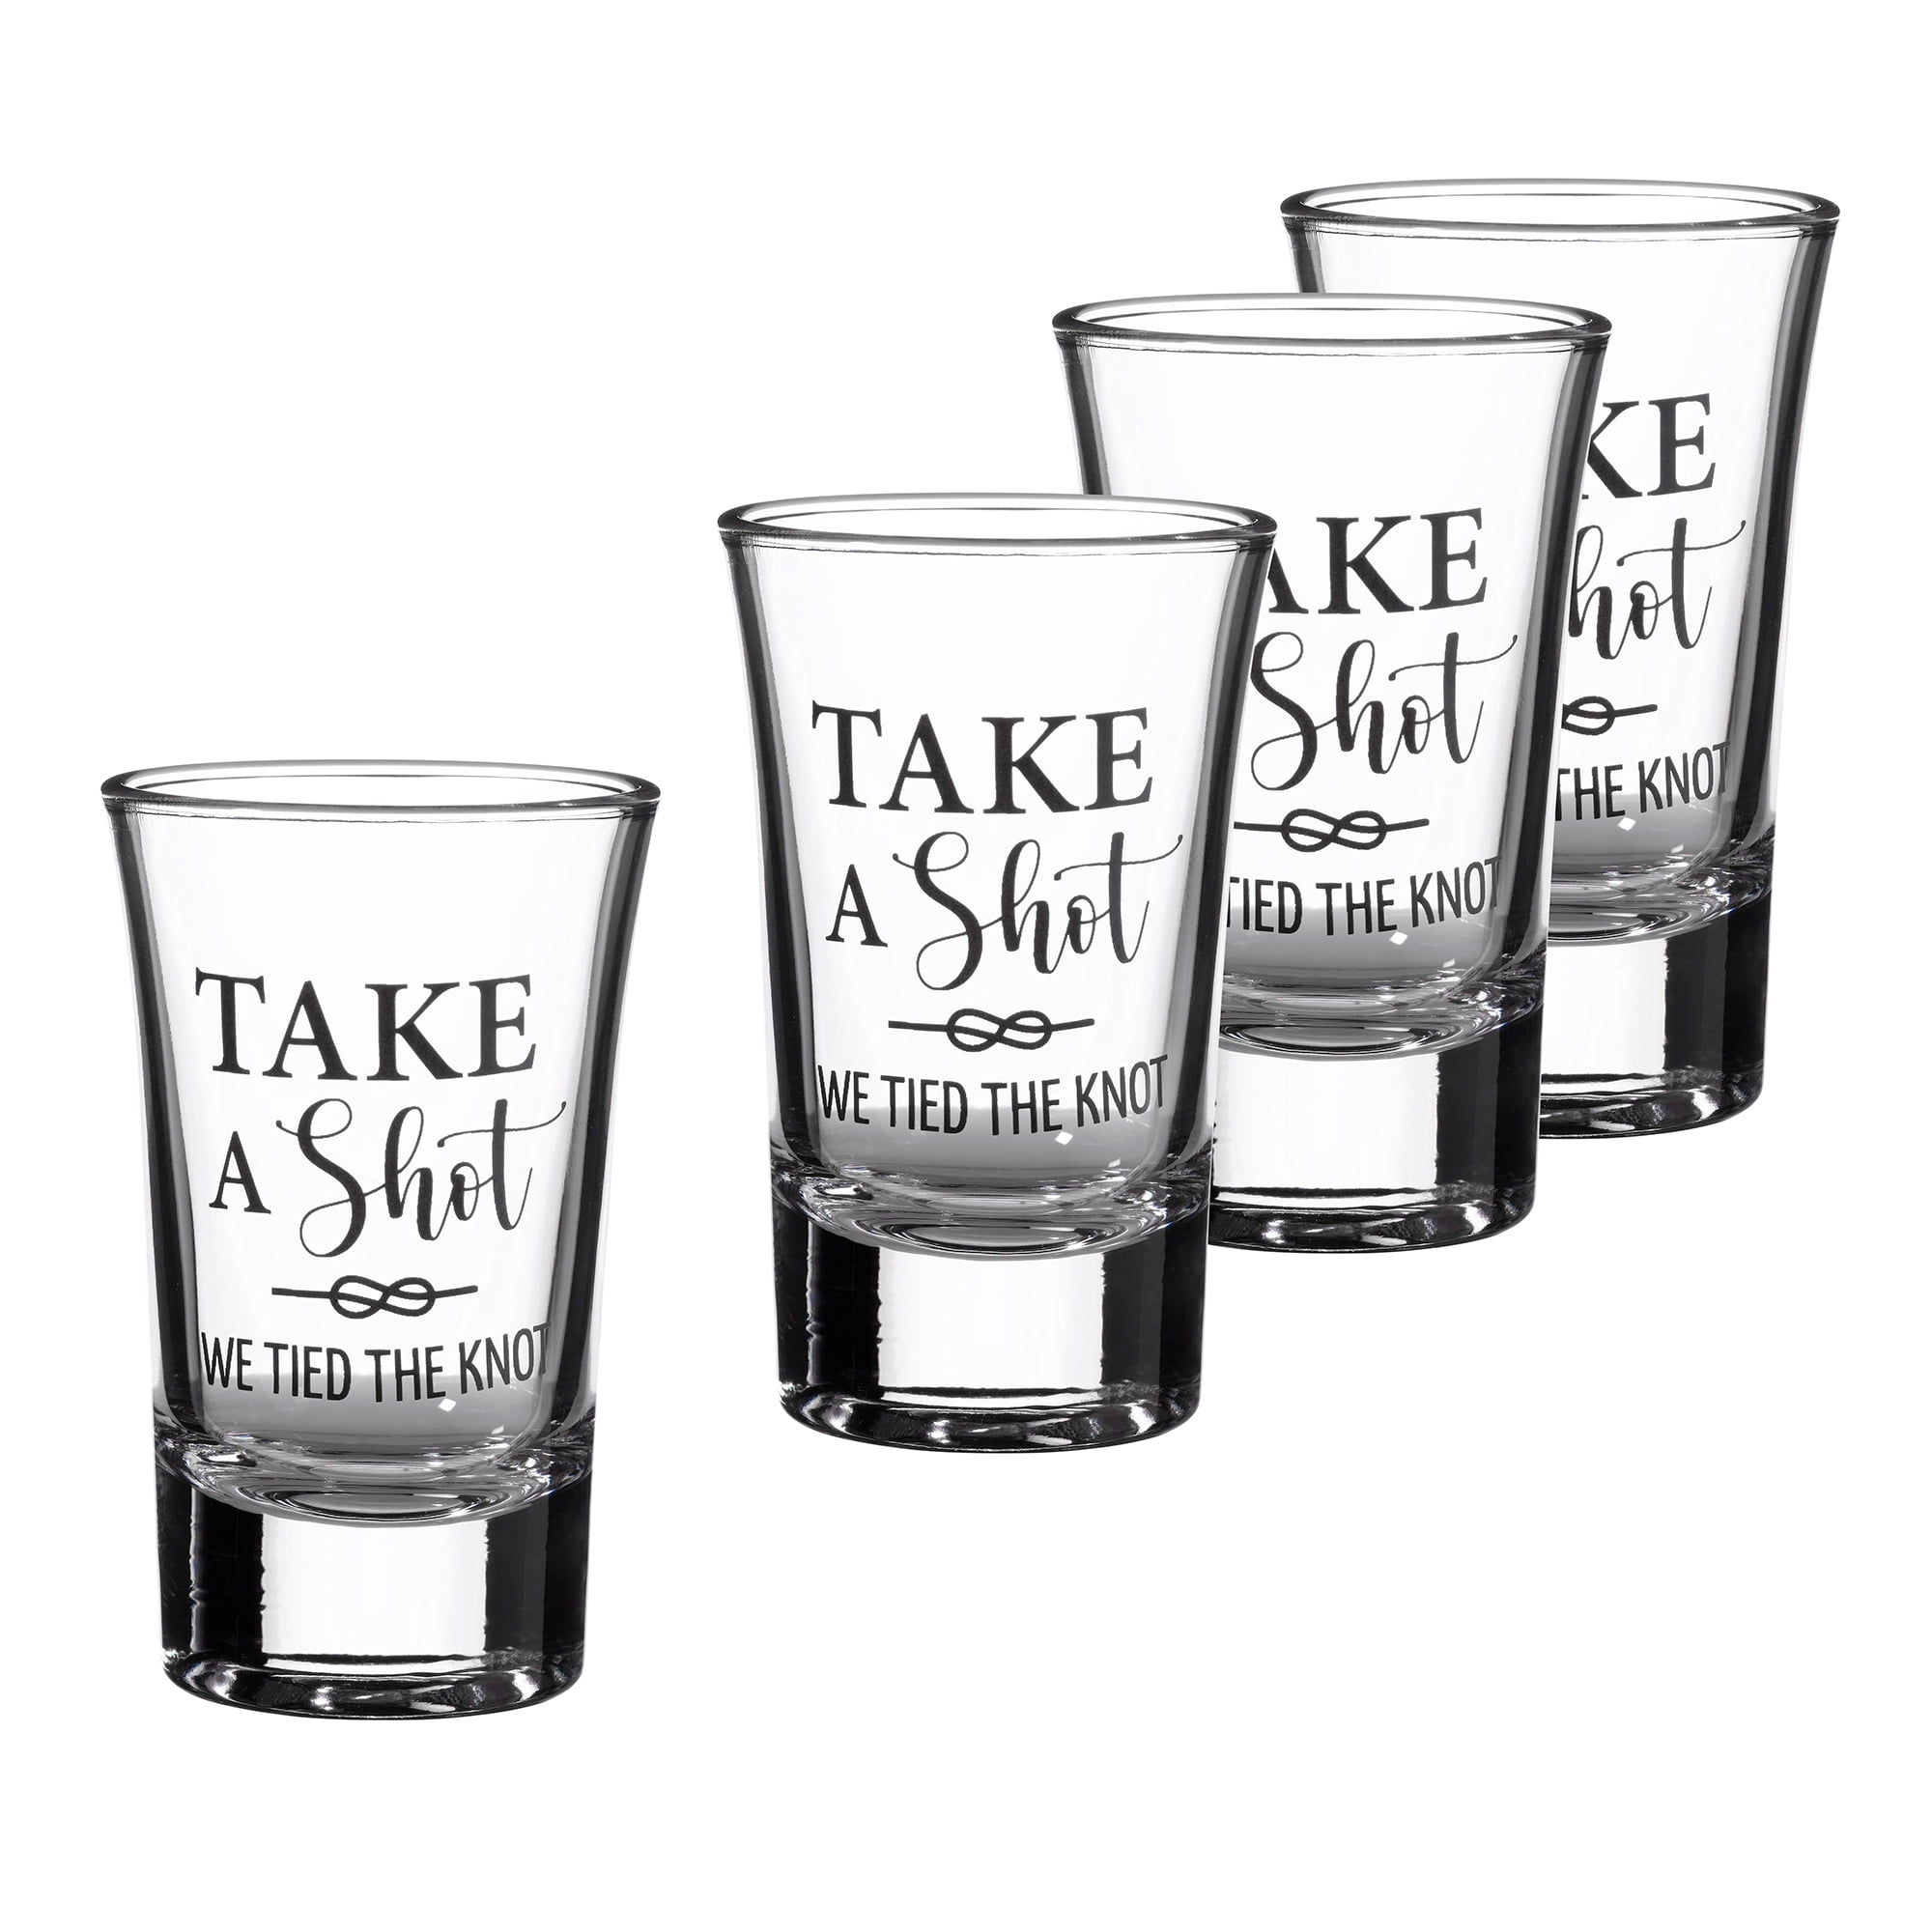 50 Personalized Shot Glasses And Gift Boxes Wedding Bridal Shower Party Favors 